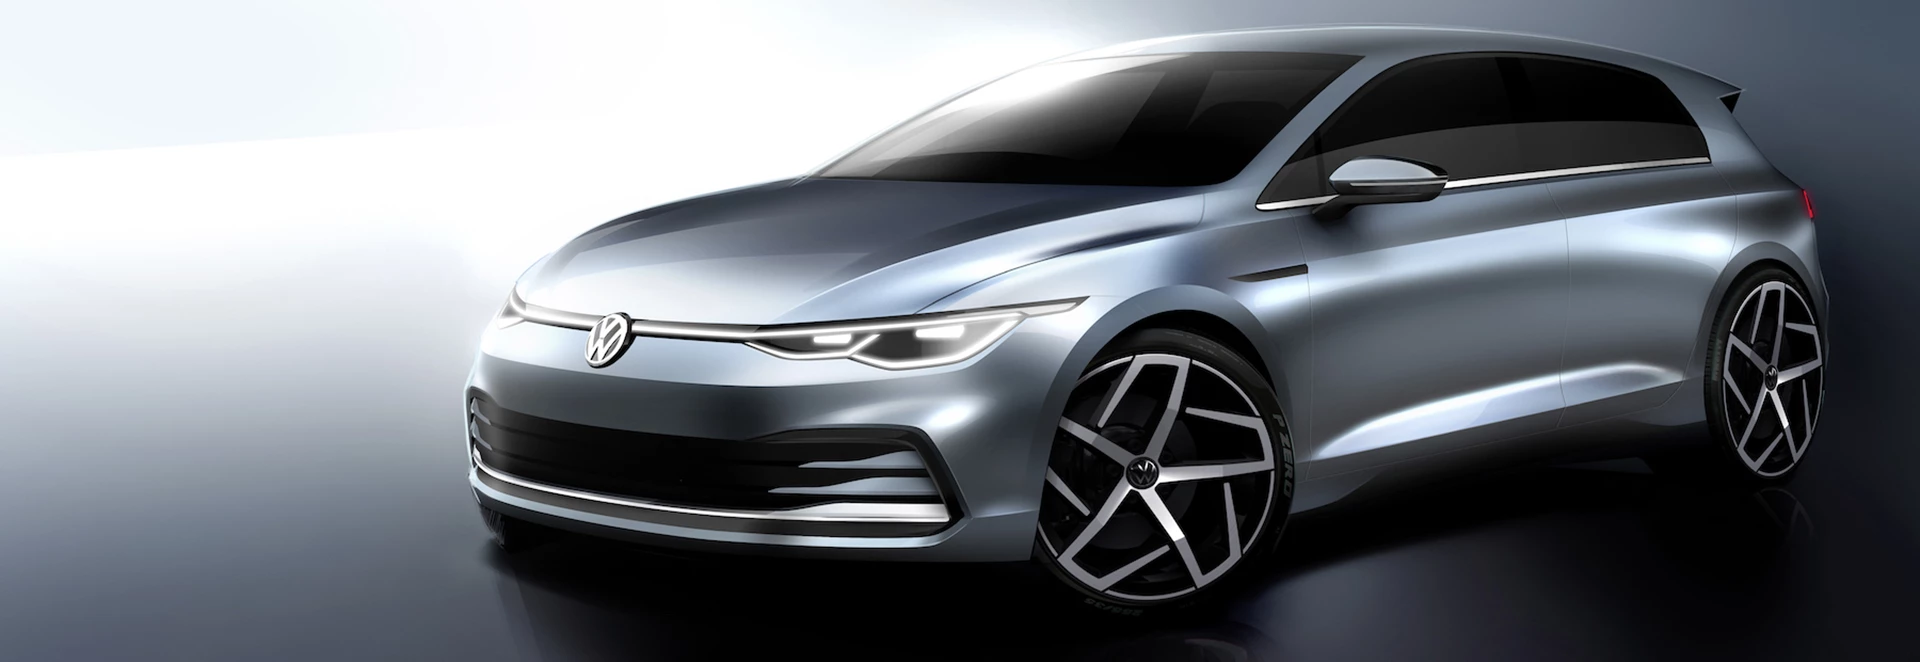 all-new Volkswagen Golf teased in sketches